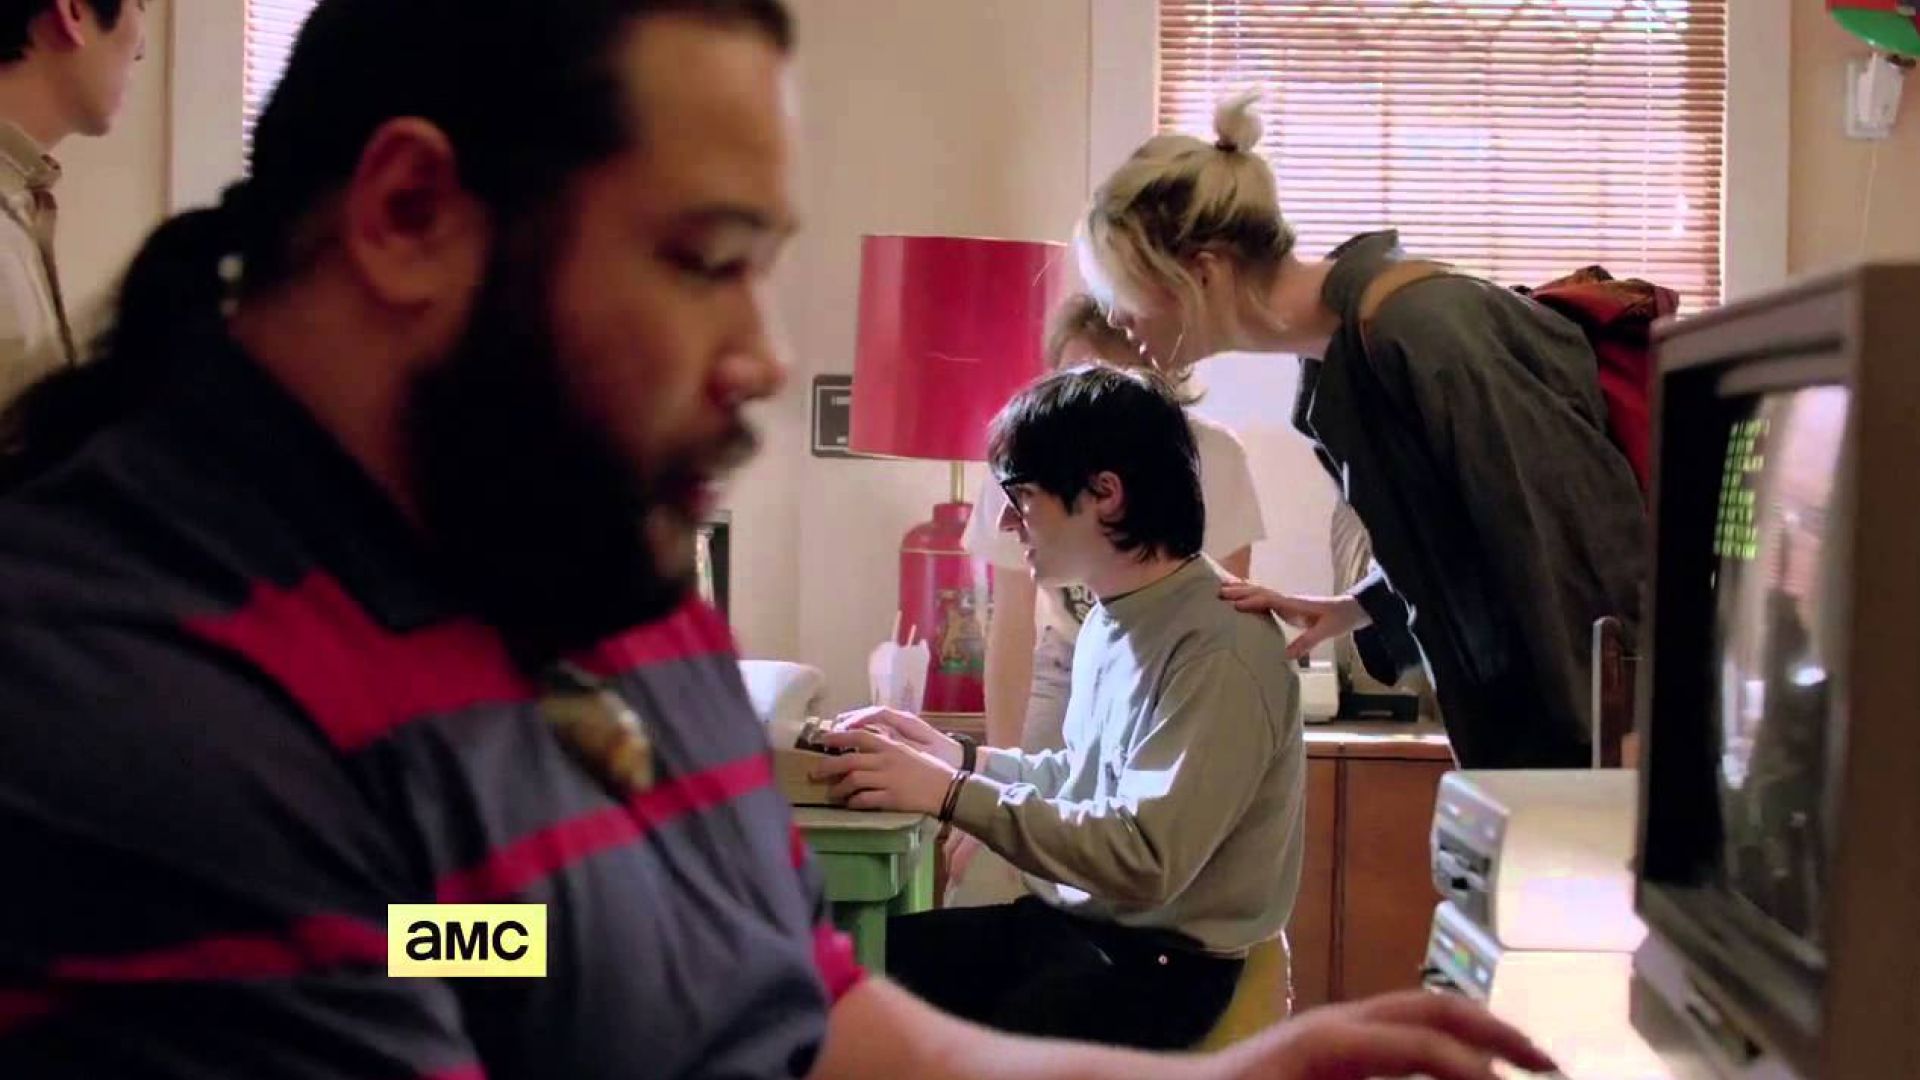 Halt and Catch Fire returns for second season May 31st